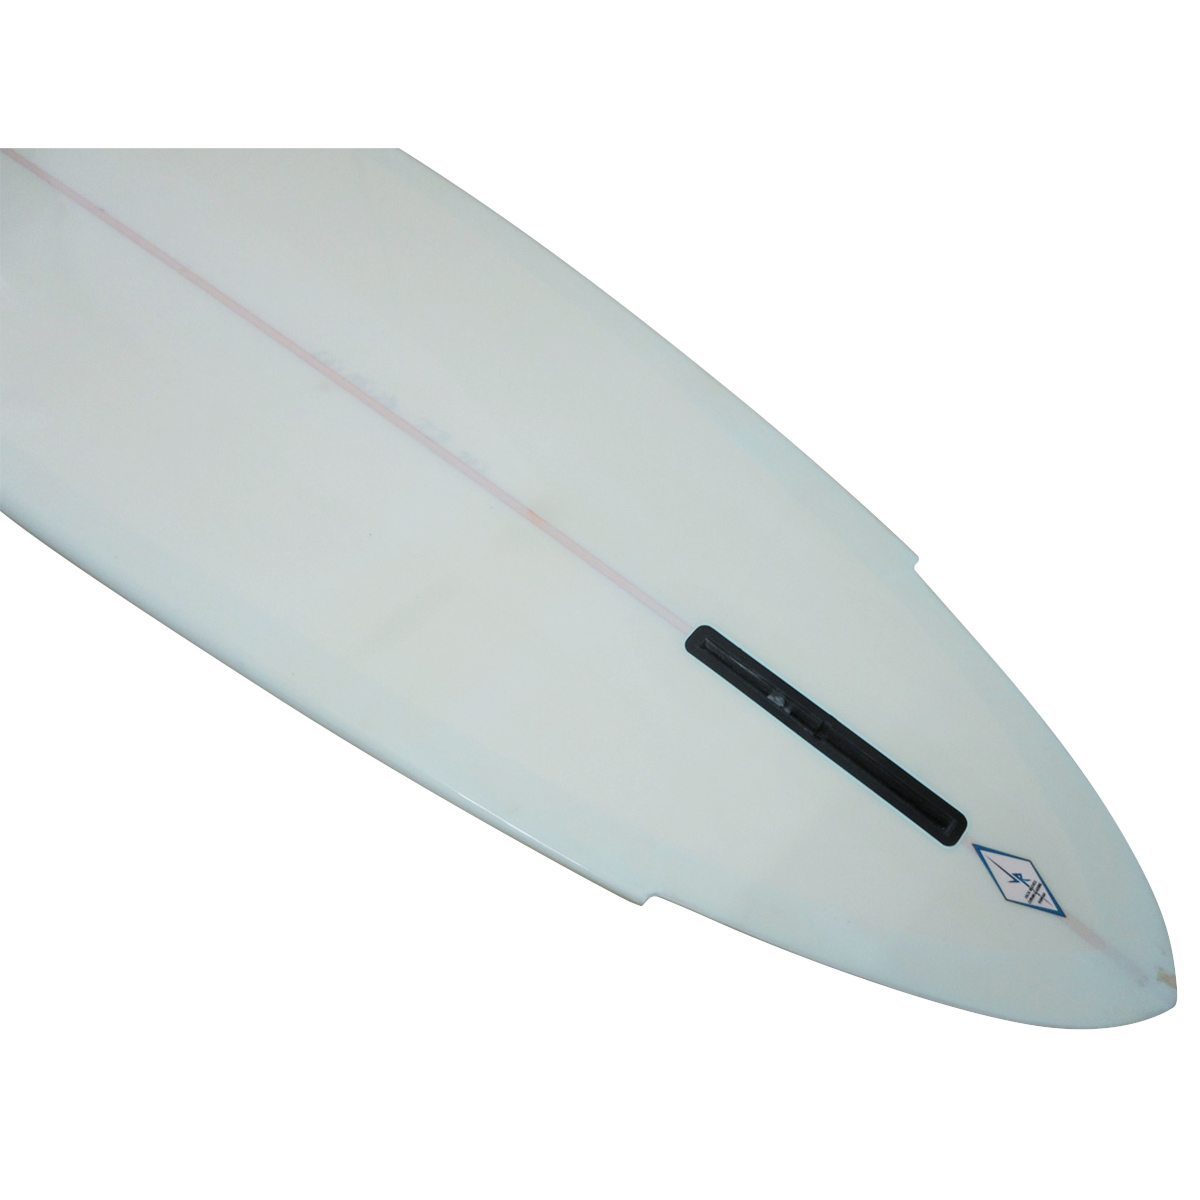 Dick Brewer / 70`S Single Fin Shaped by Dick Brewer 